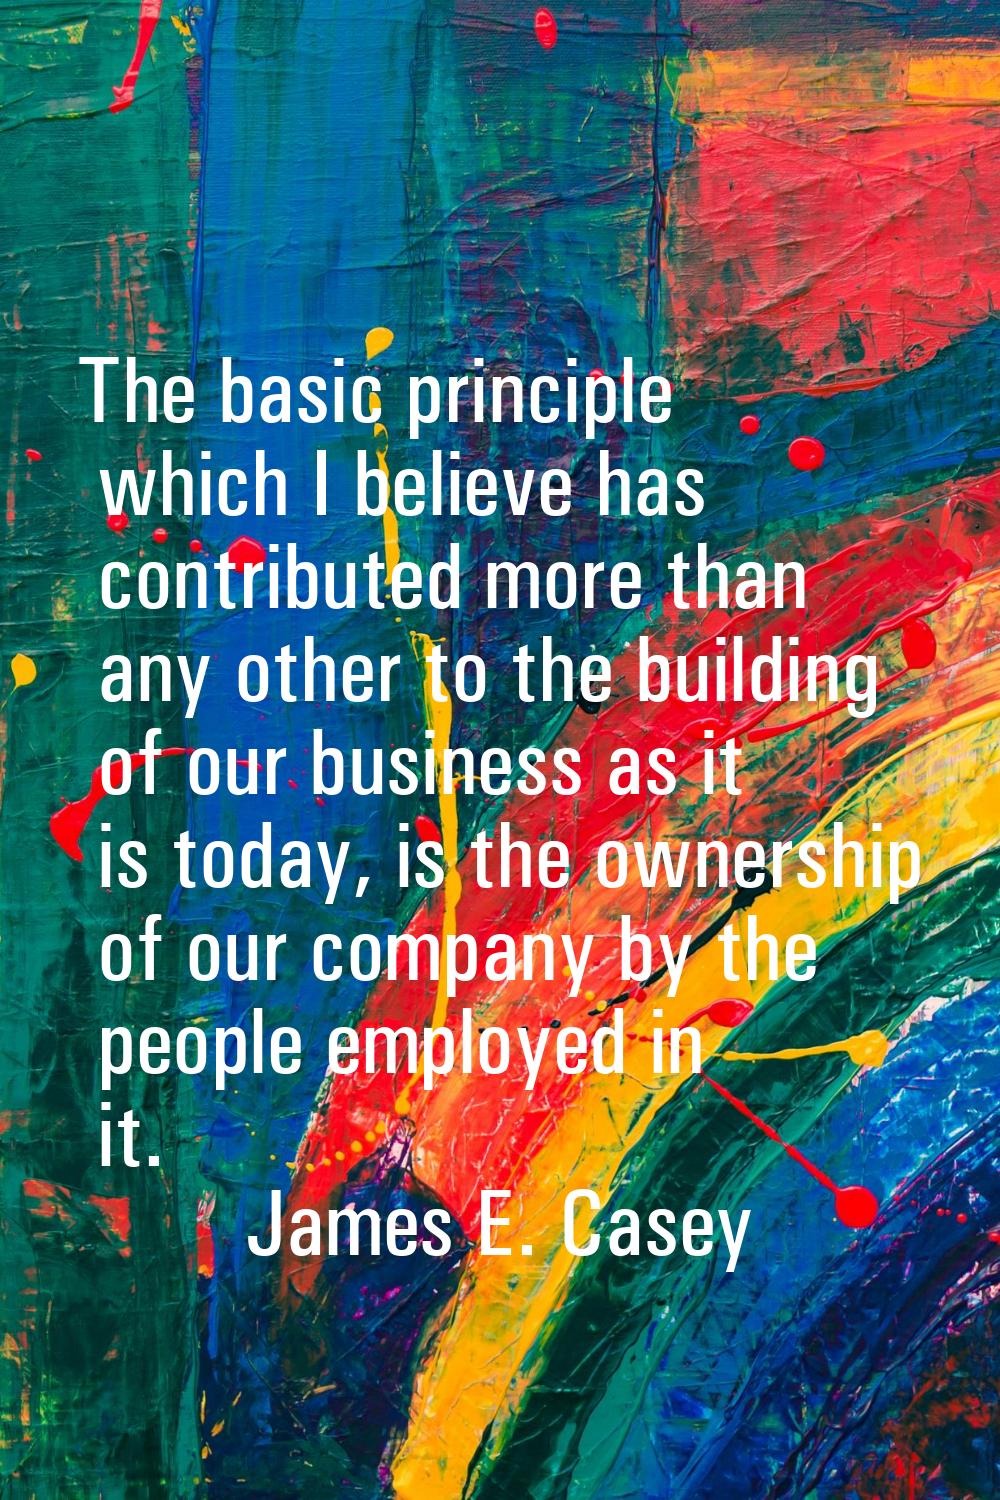 The basic principle which I believe has contributed more than any other to the building of our busi